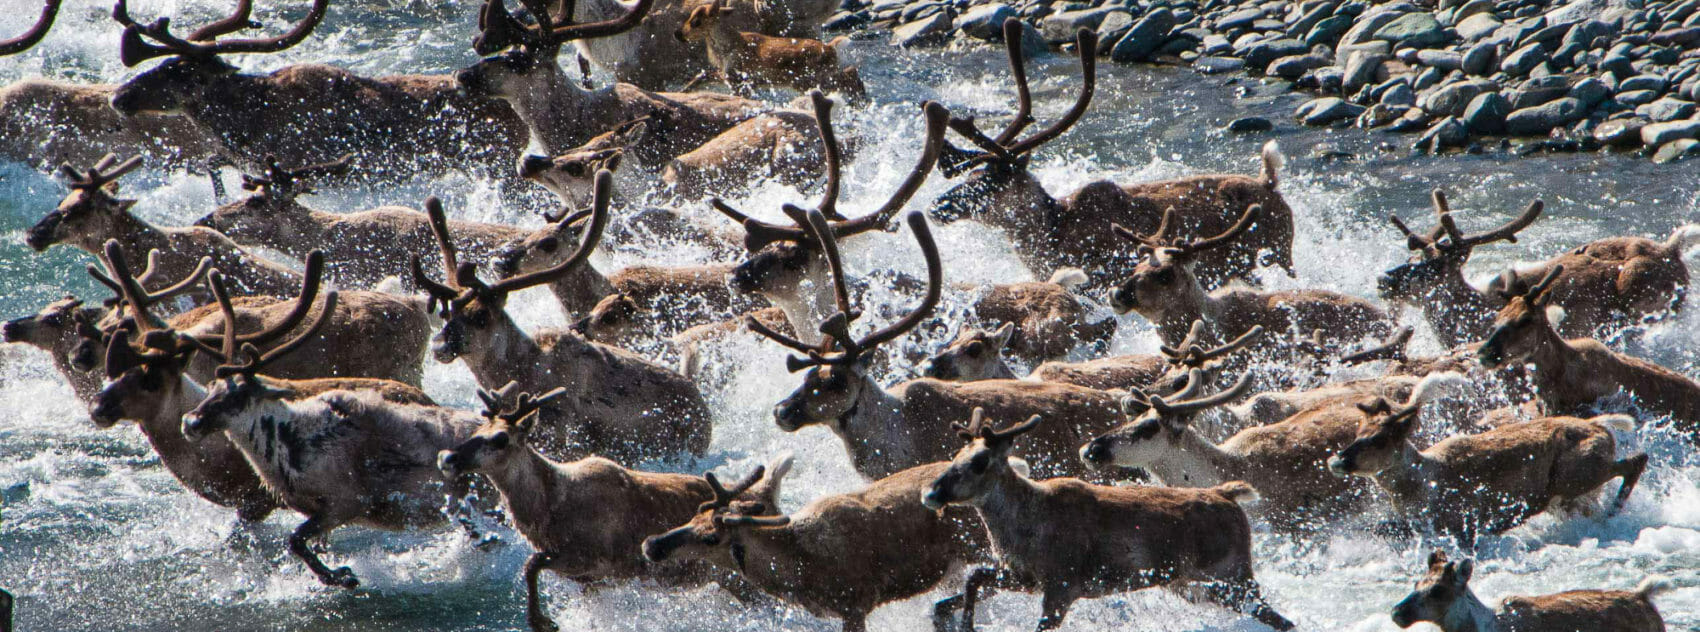 caribou migrate across a river in northern Alaska